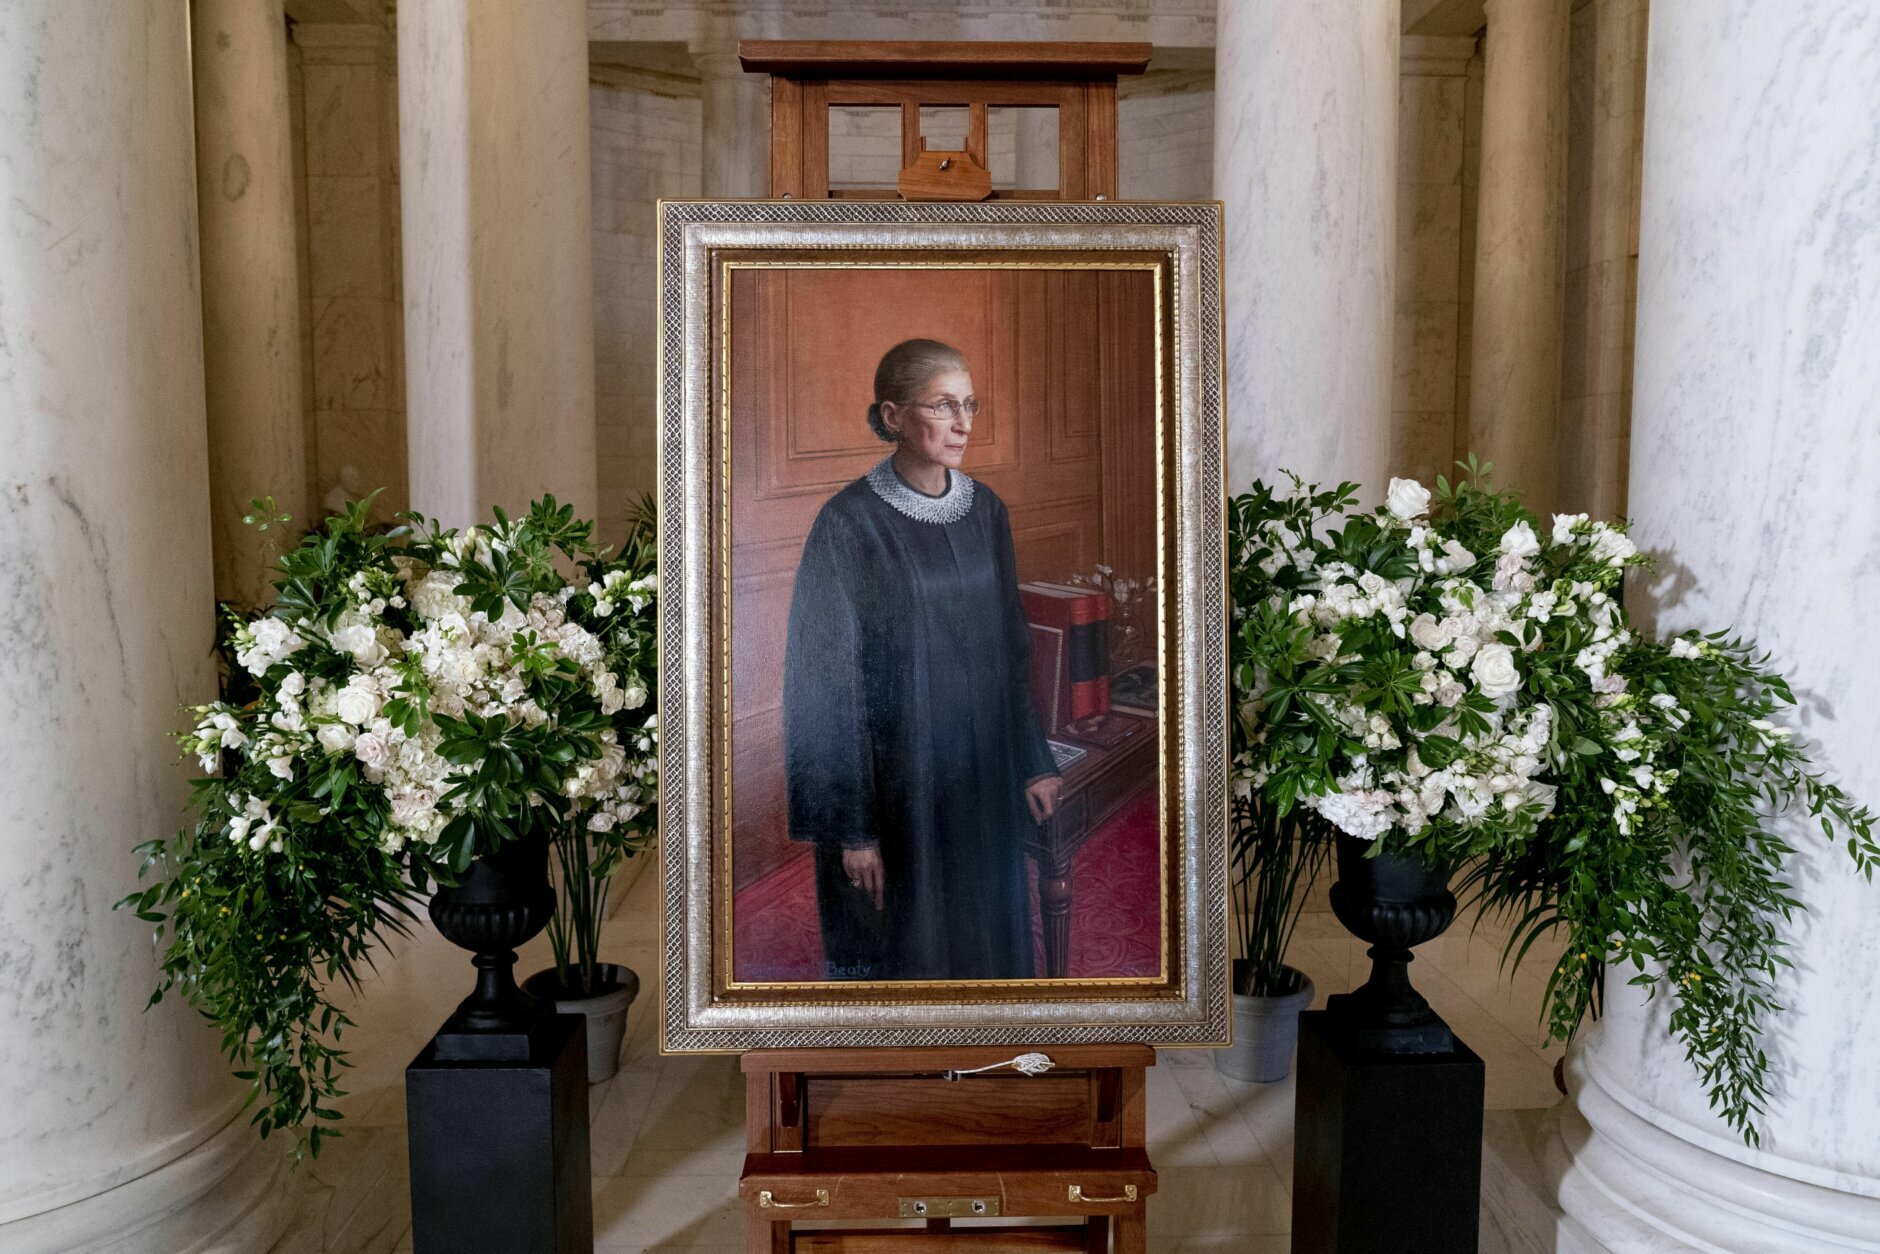 A 2016 portrait of Associate Justice Ruth Bader Ginsburg by artist Constance P. Beaty is displayed in the Great Hall following a private ceremony for her at the Supreme Court in Washington, Wednesday, Sept. 23, 2020. Ginsburg, 87, died of cancer on Sept. 18. (AP Photo/Andrew Harnik, Pool)